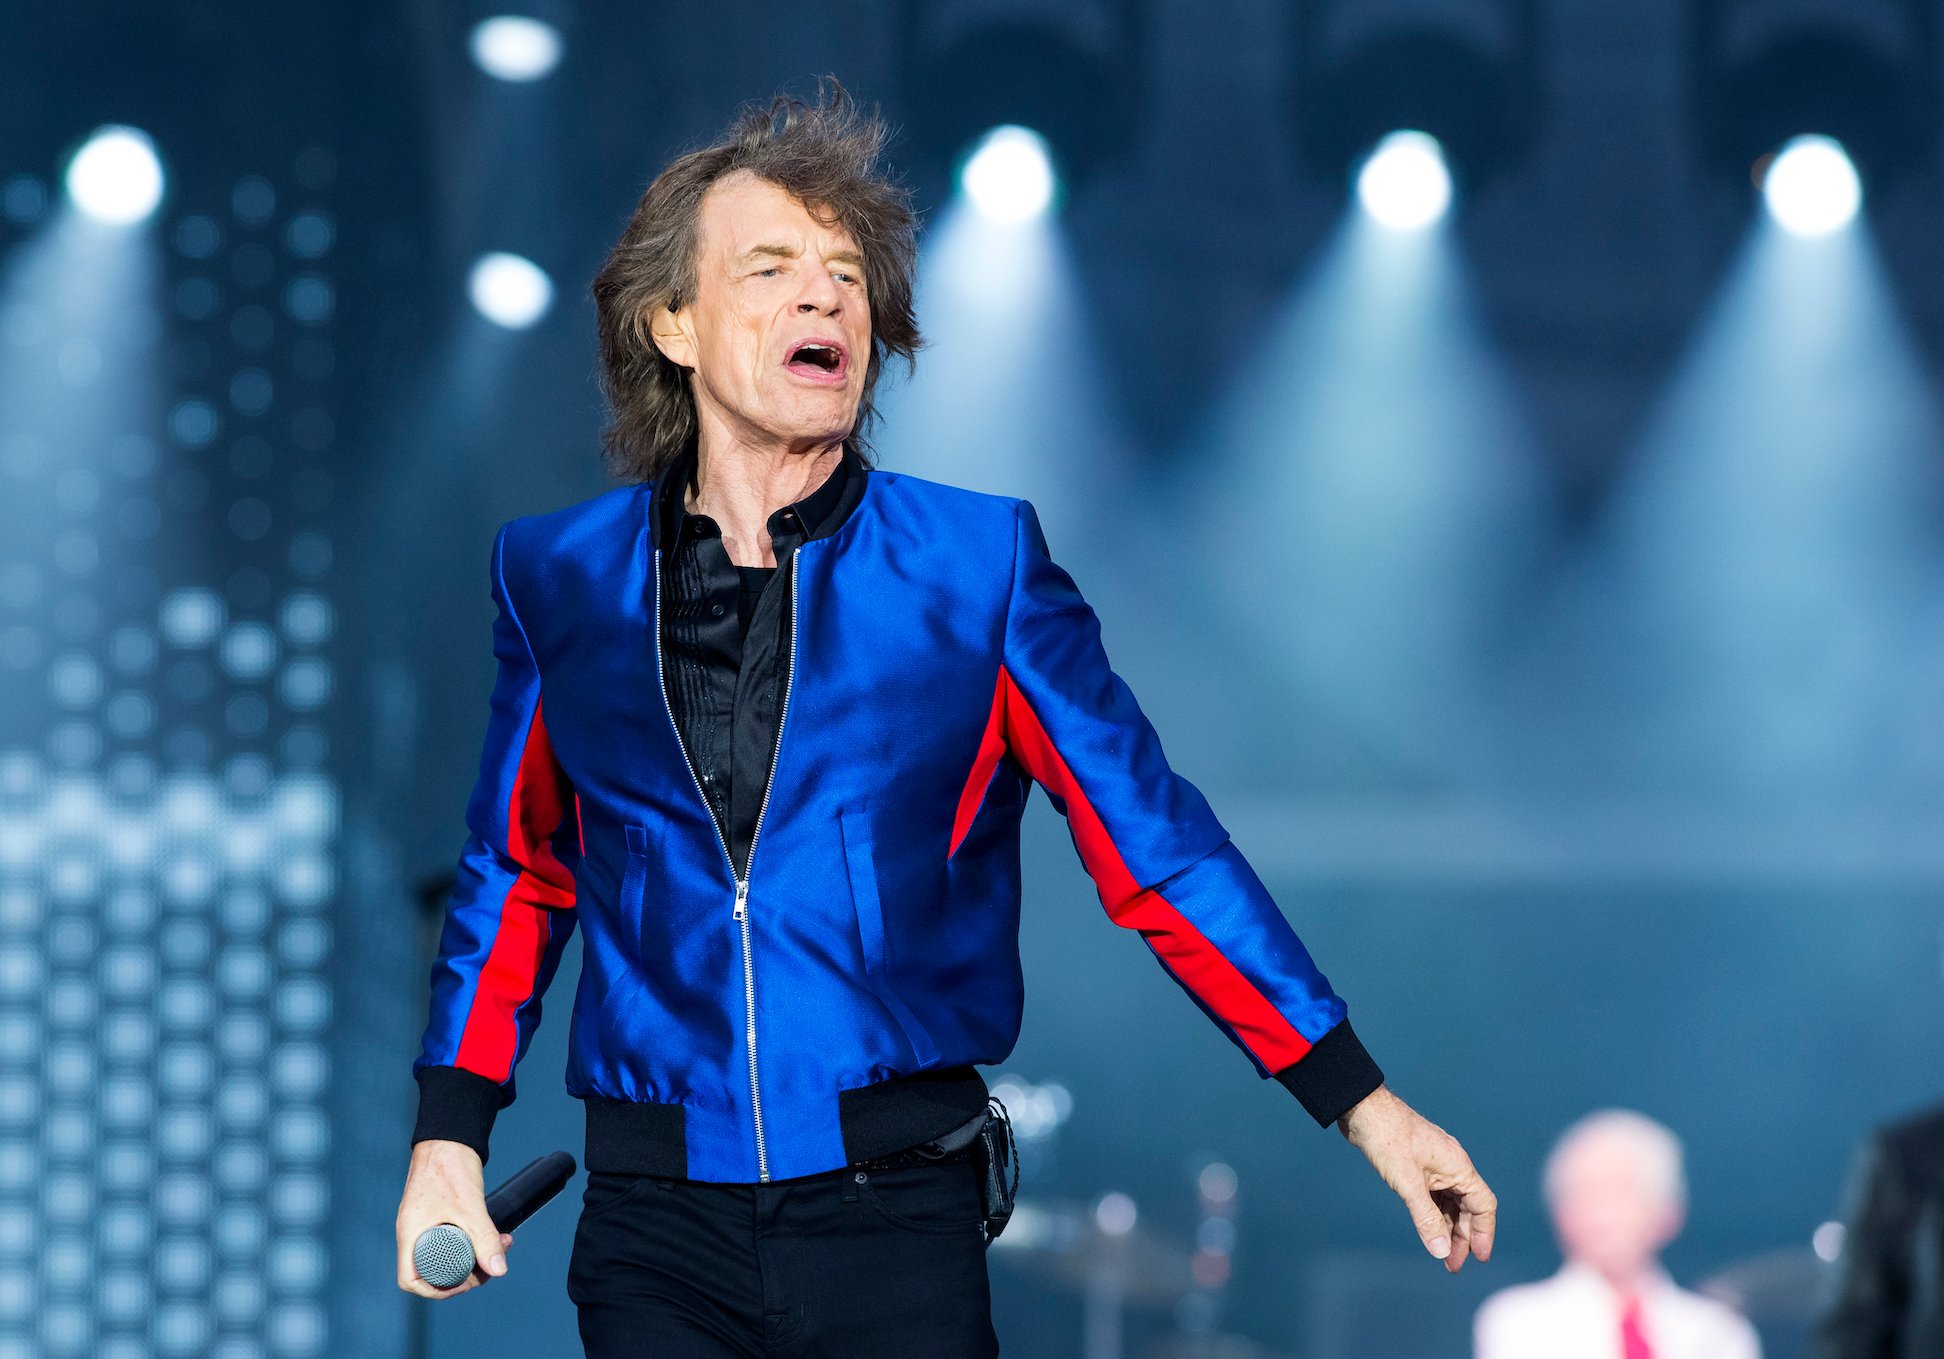 Mick Jagger performs with The Rolling Stones at St. Mary's Stadium in Southampton, England